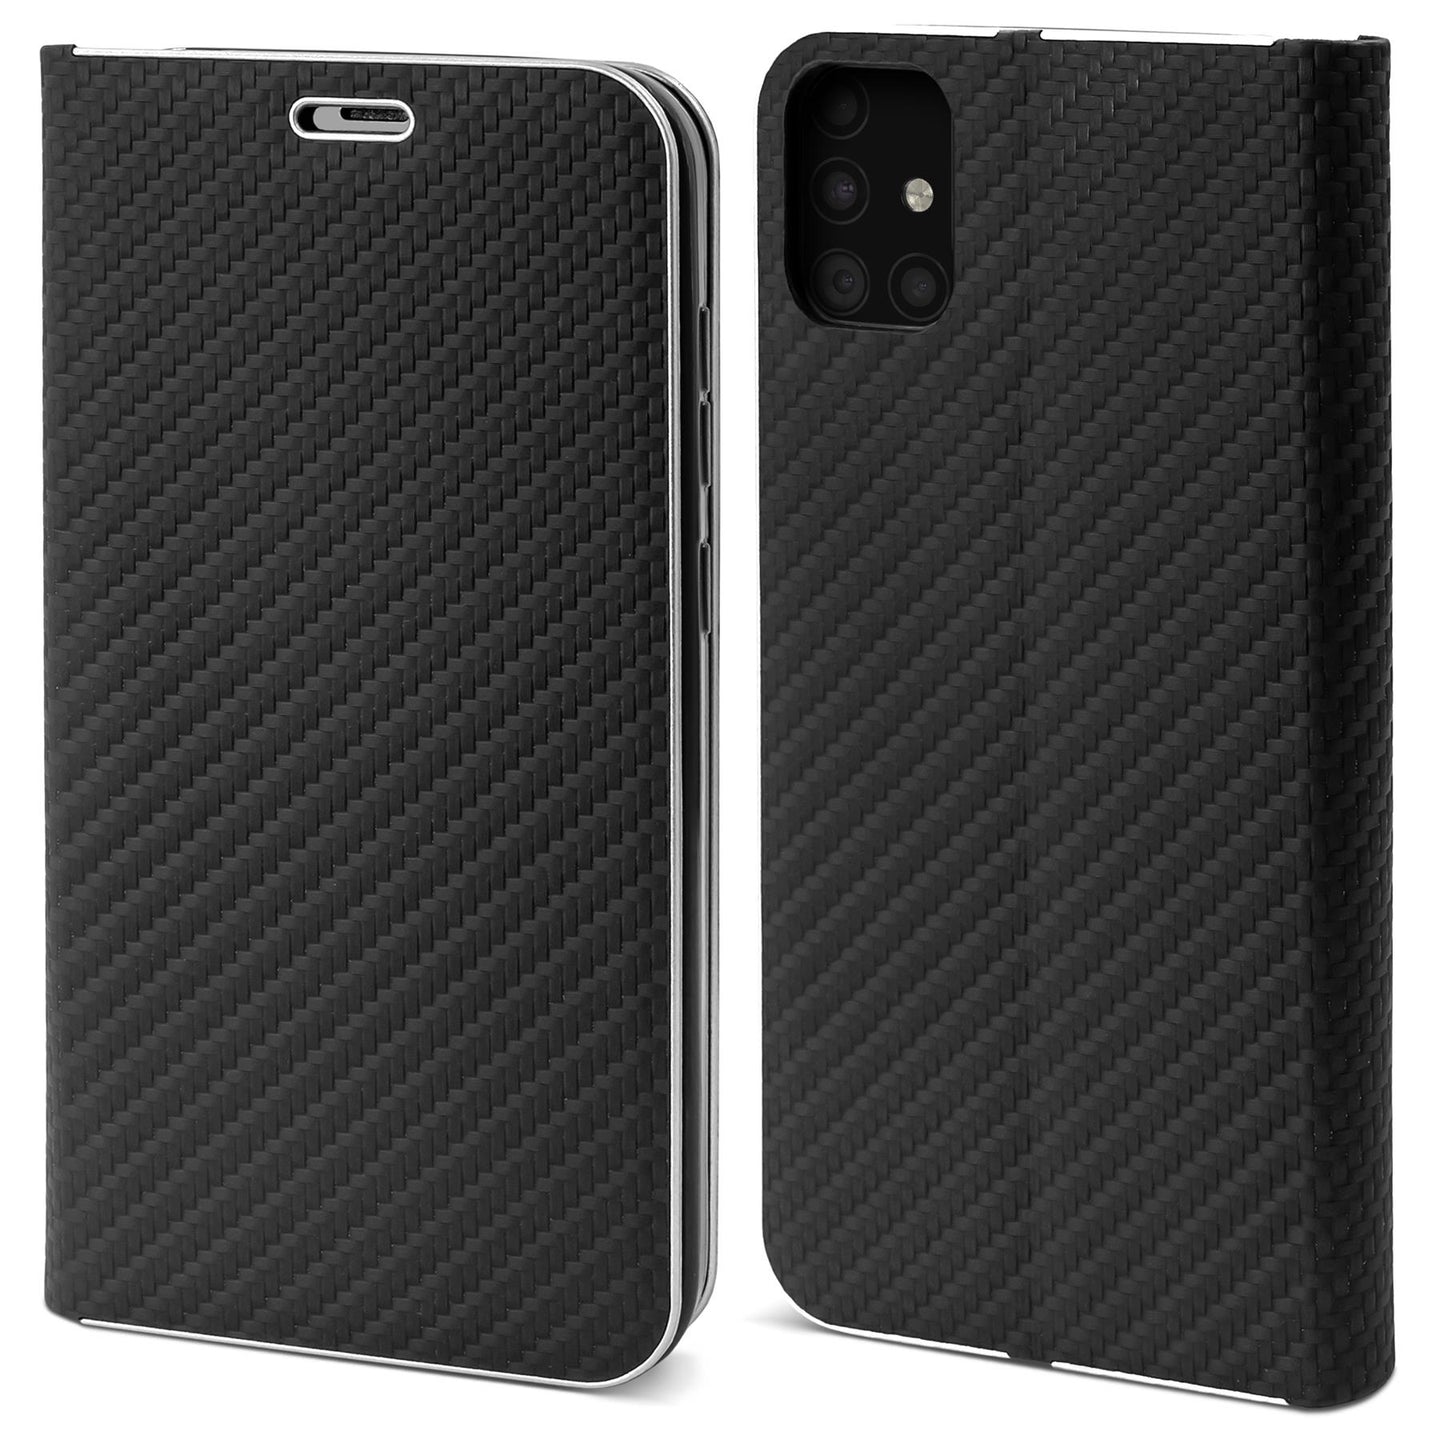 Moozy Wallet Case for Samsung A51, Black Carbon – Metallic Edge Protection Magnetic Closure Flip Cover with Card Holder